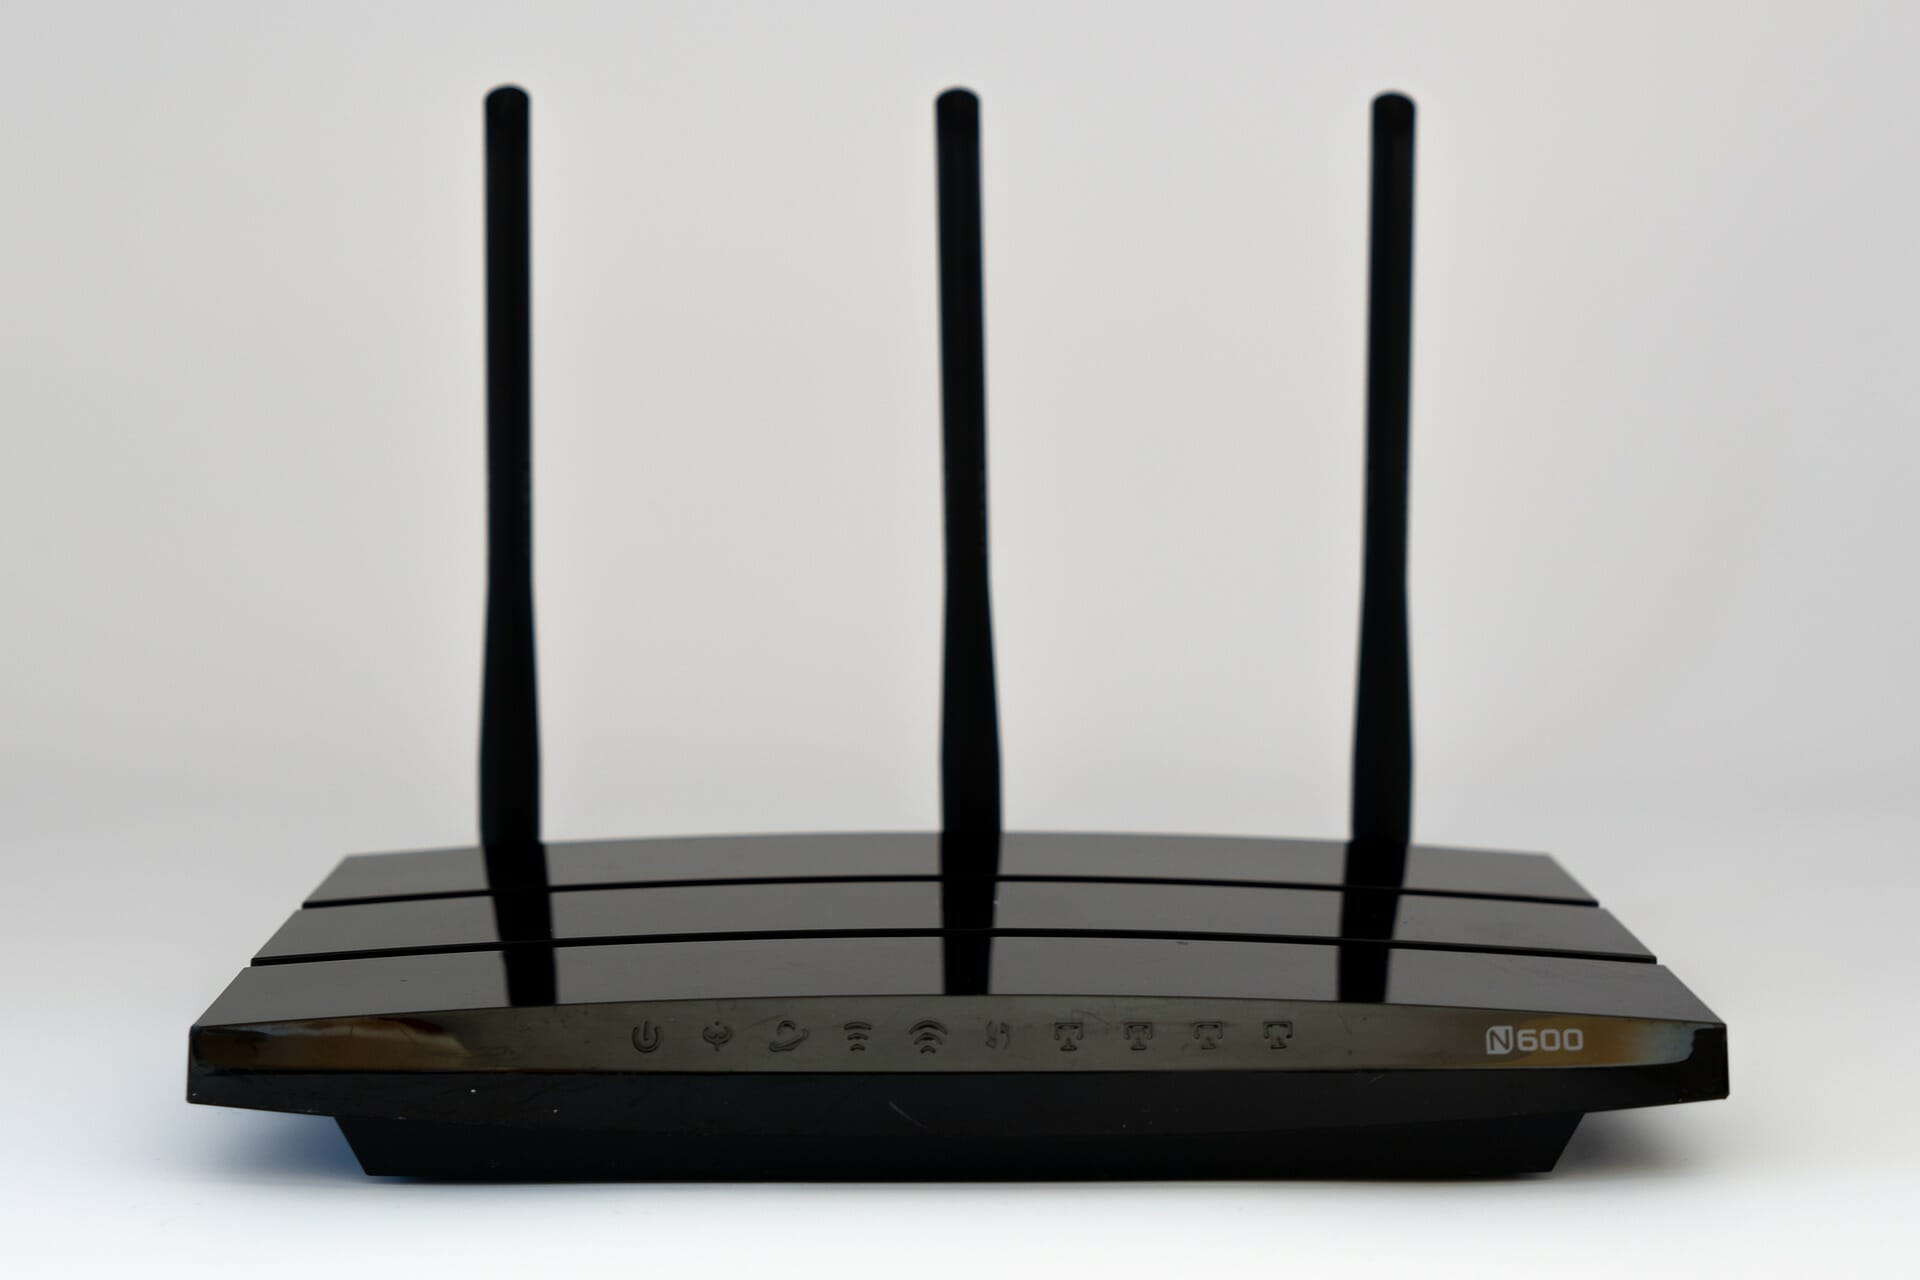 Windows can’t get the network settings from the router